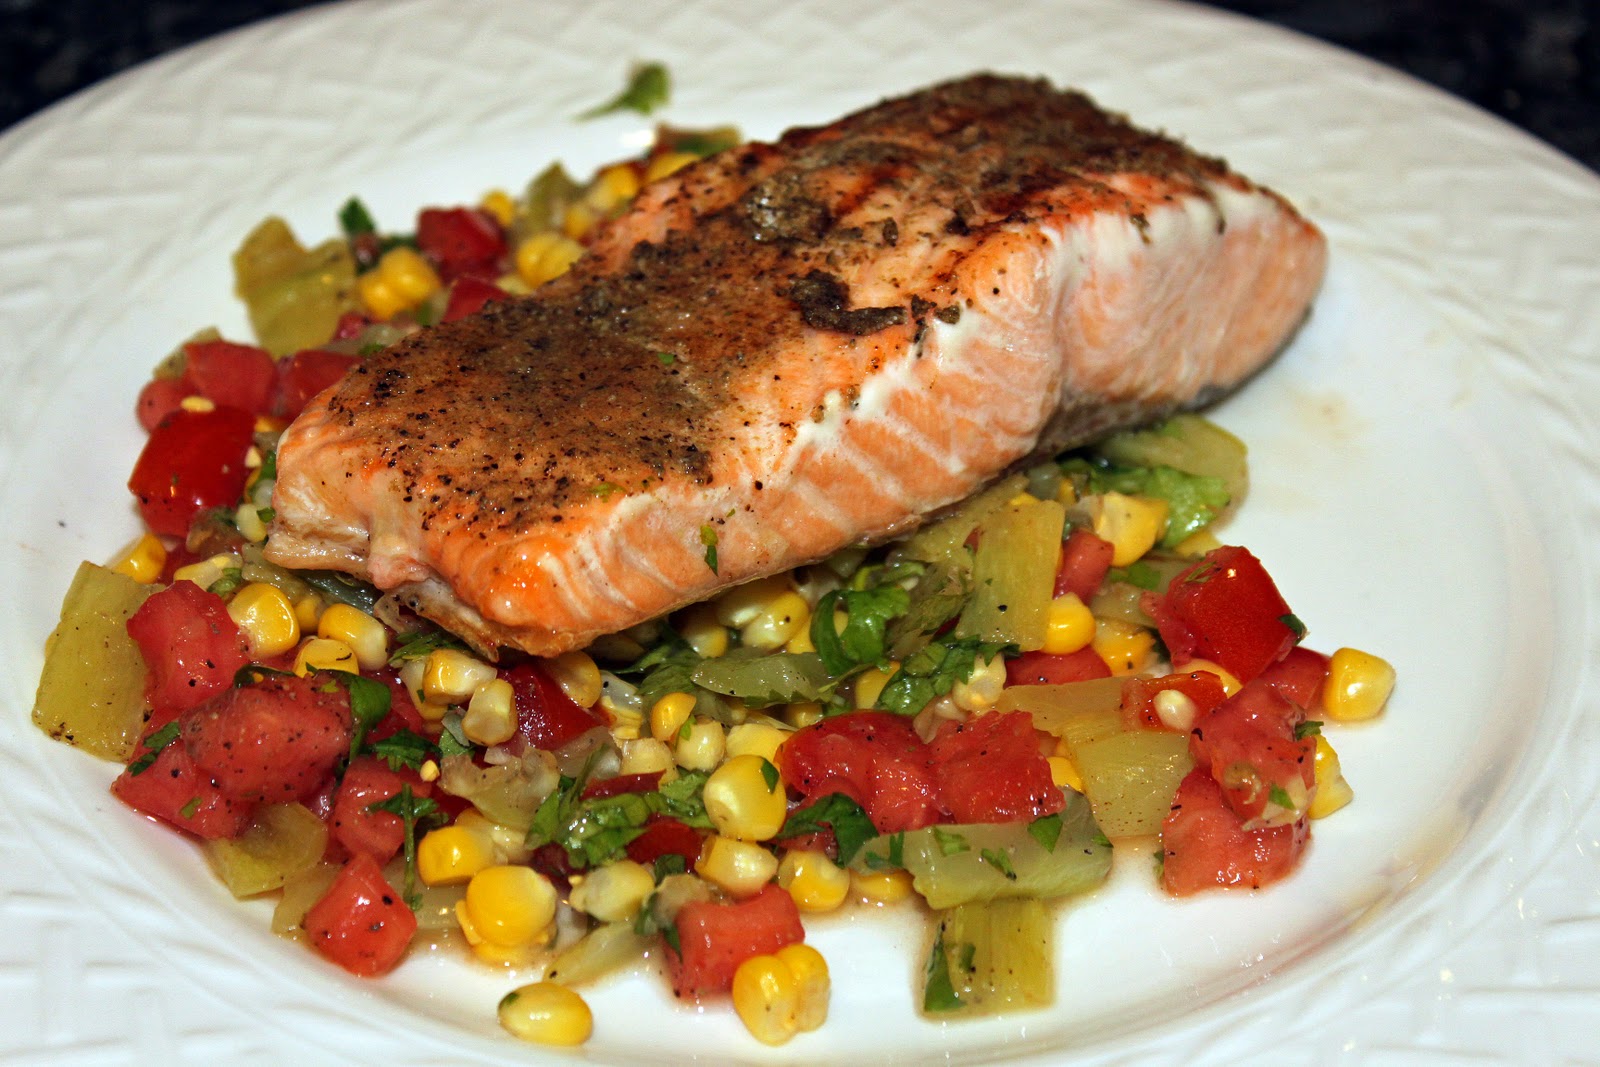 Eats & Sweets: Grilled Salmon with Roasted Corn Relish